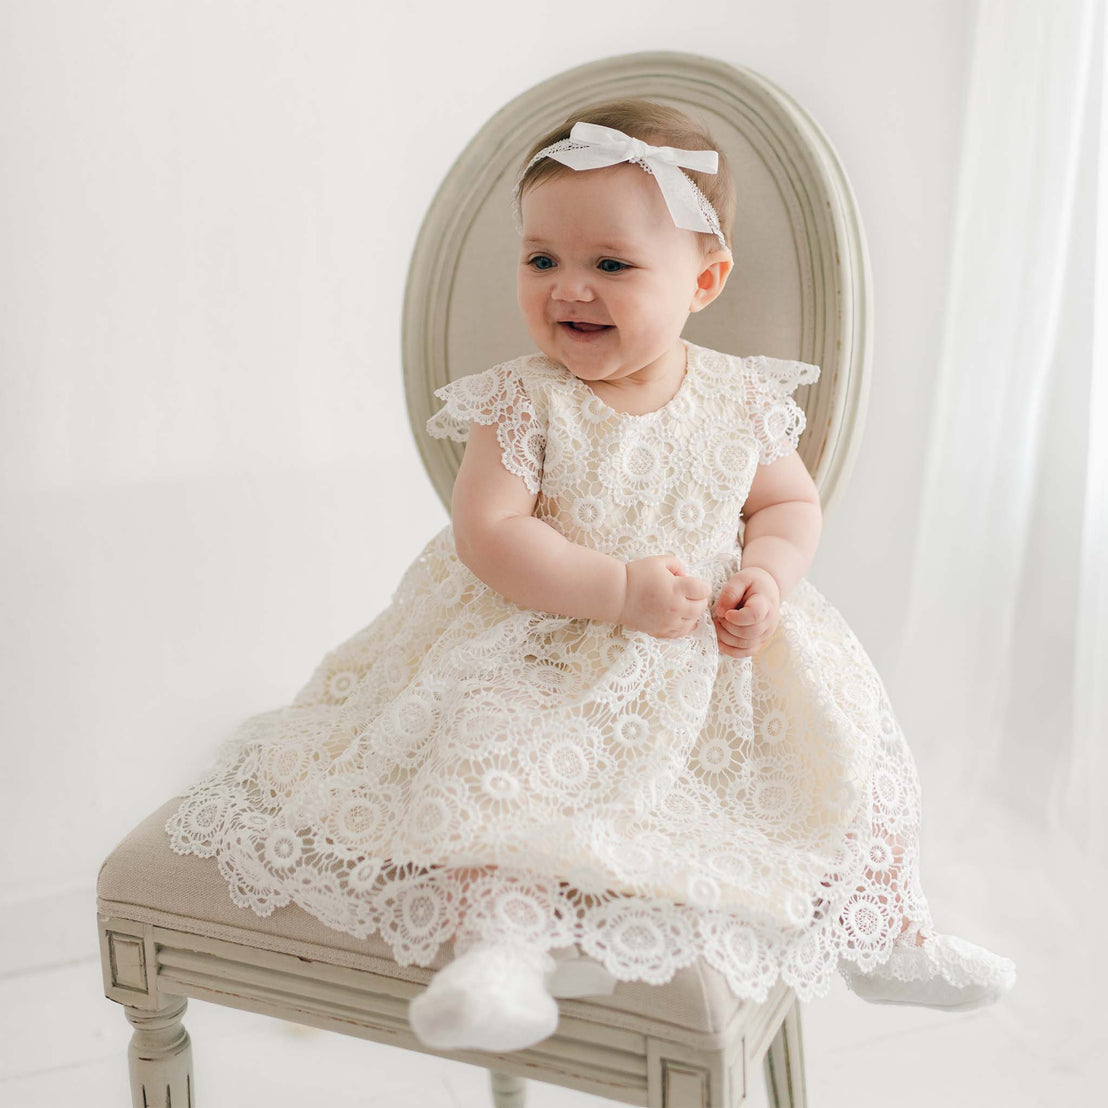 A baby sits on a cream-colored chair, wearing a beautiful Poppy Blessing Dress & Bonnet with lace sleeves and a white headband. The baby smiles and clasps hands together, with white socks on their feet. The background is a softly lit, plain white room.